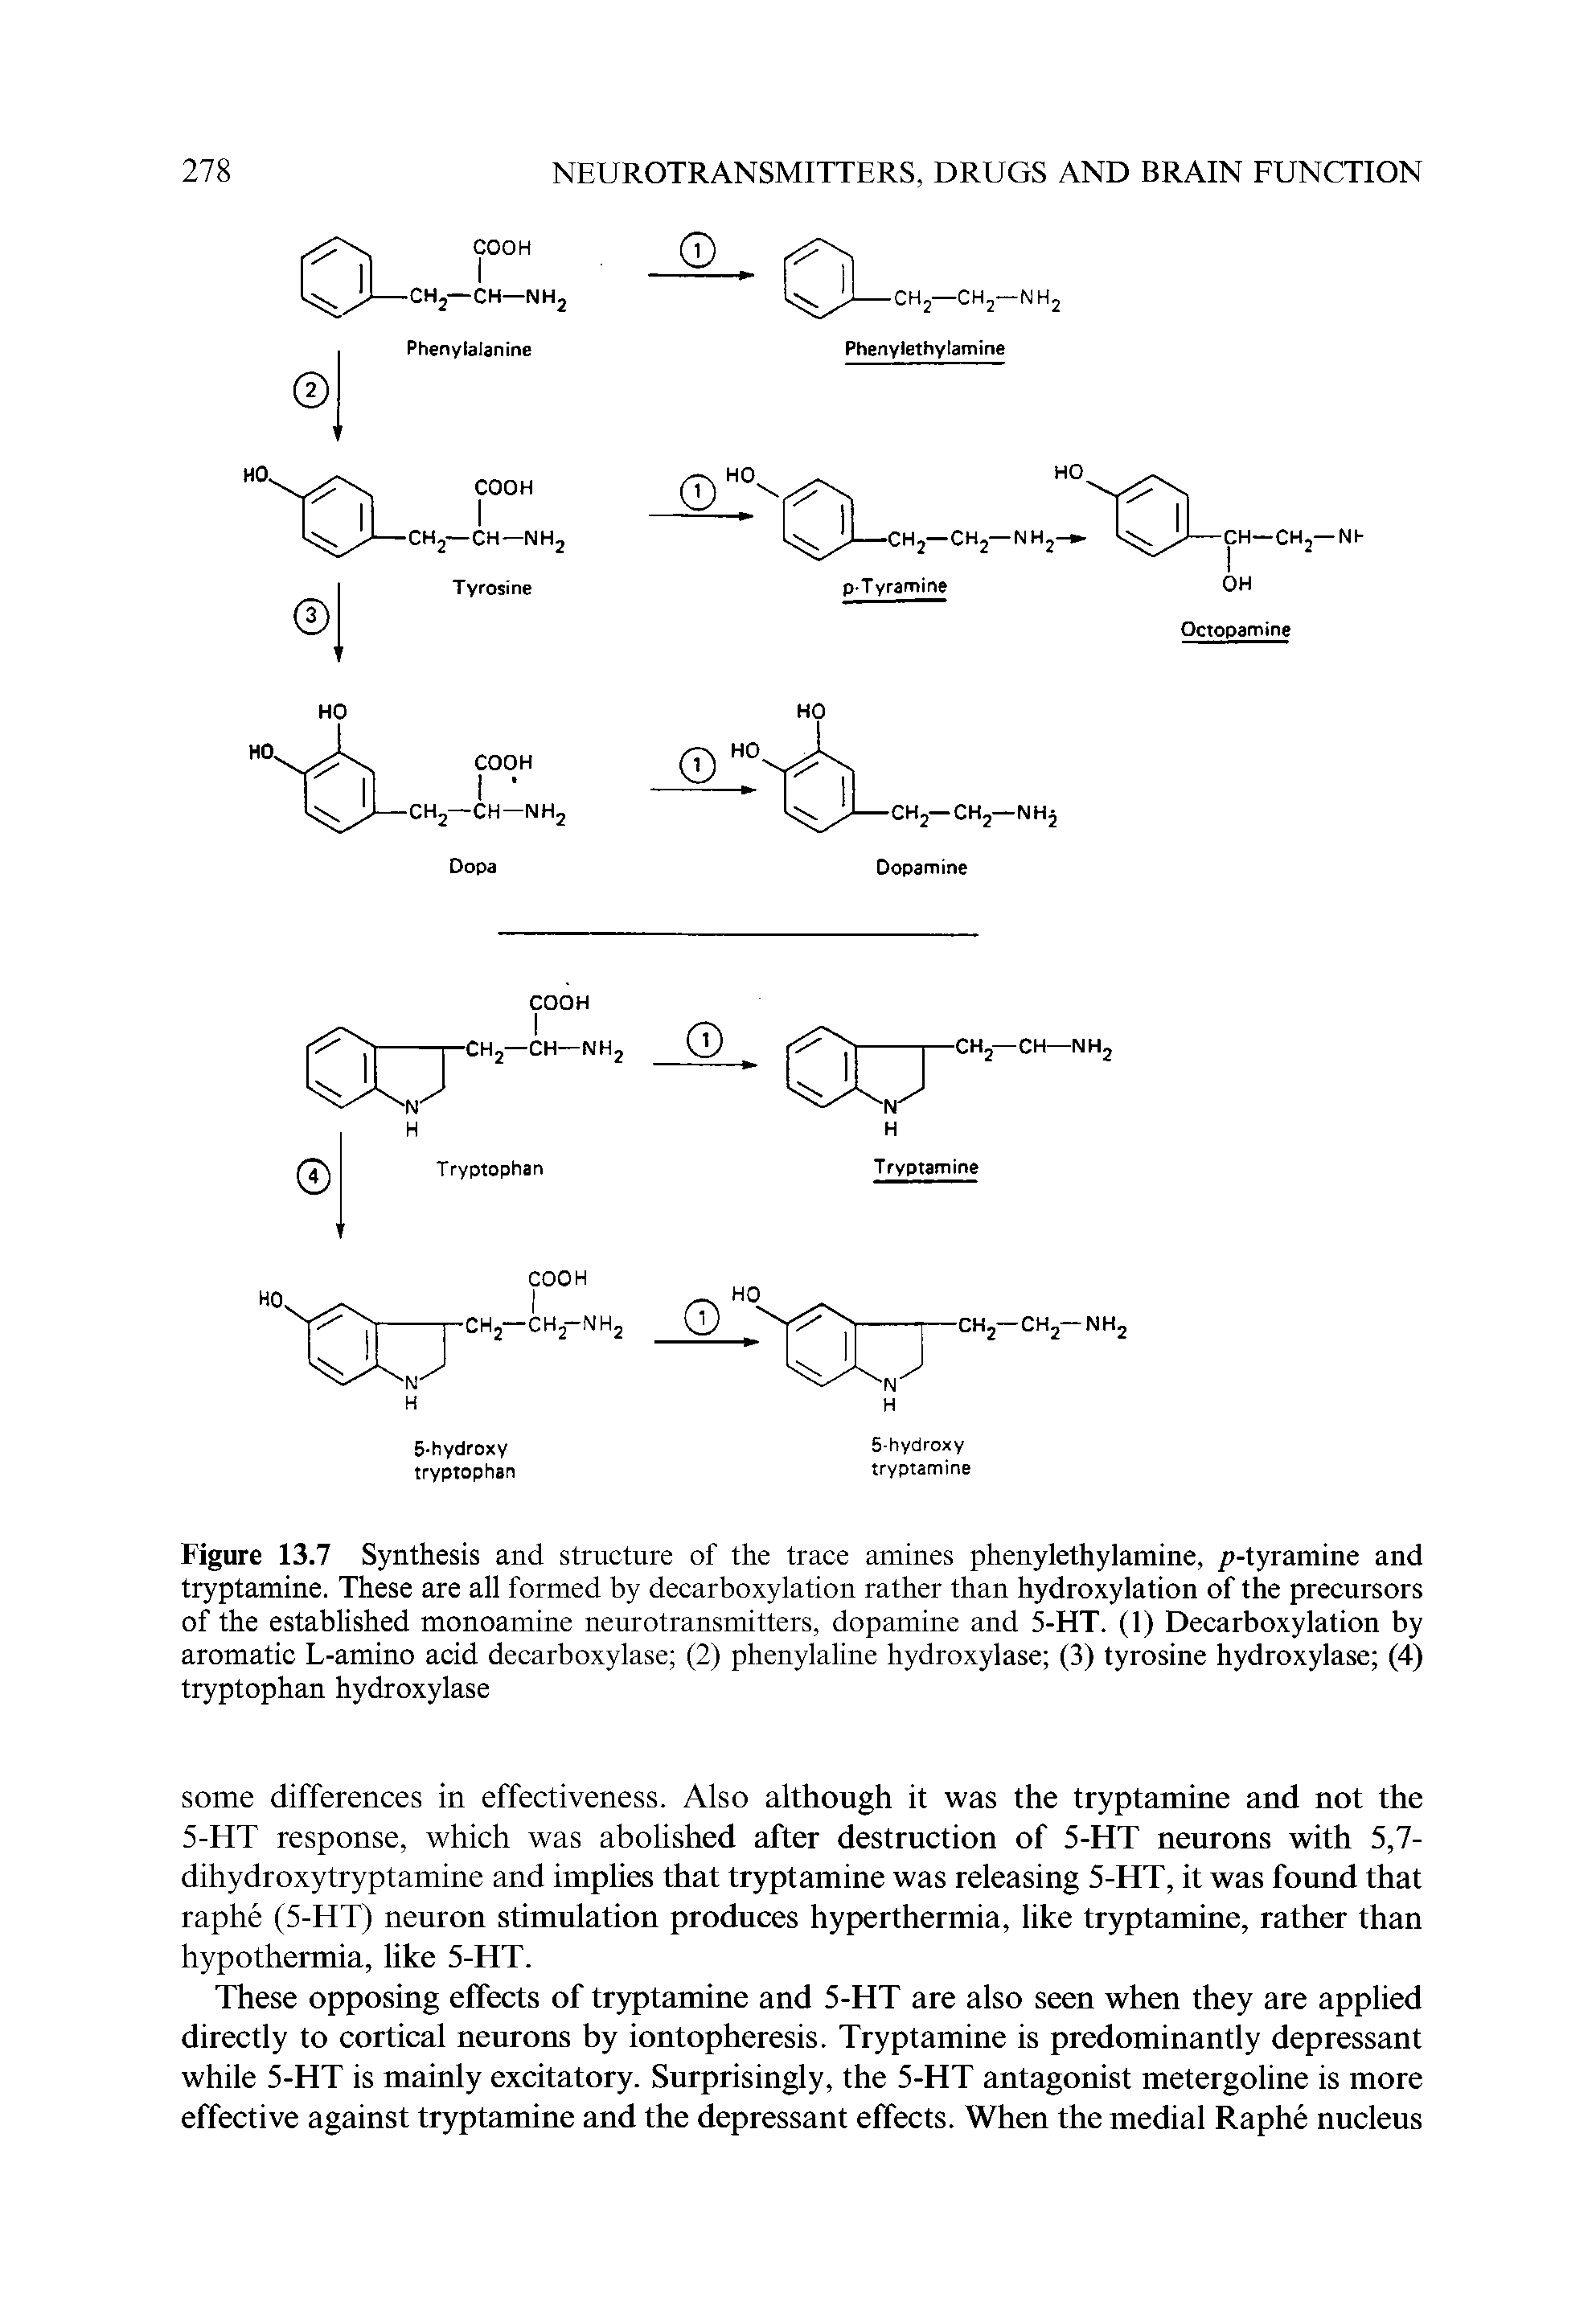 Figure 13.7 Synthesis and structure of the trace amines phenylethylamine, /)-tyramine and tryptamine. These are all formed by decarboxylation rather than hydroxylation of the precursors of the established monoamine neurotransmitters, dopamine and 5-HT. (1) Decarboxylation by aromatic L-amino acid decarboxylase (2) phenylaline hydroxylase (3) tyrosine hydroxylase (4) tryptophan hydroxylase...